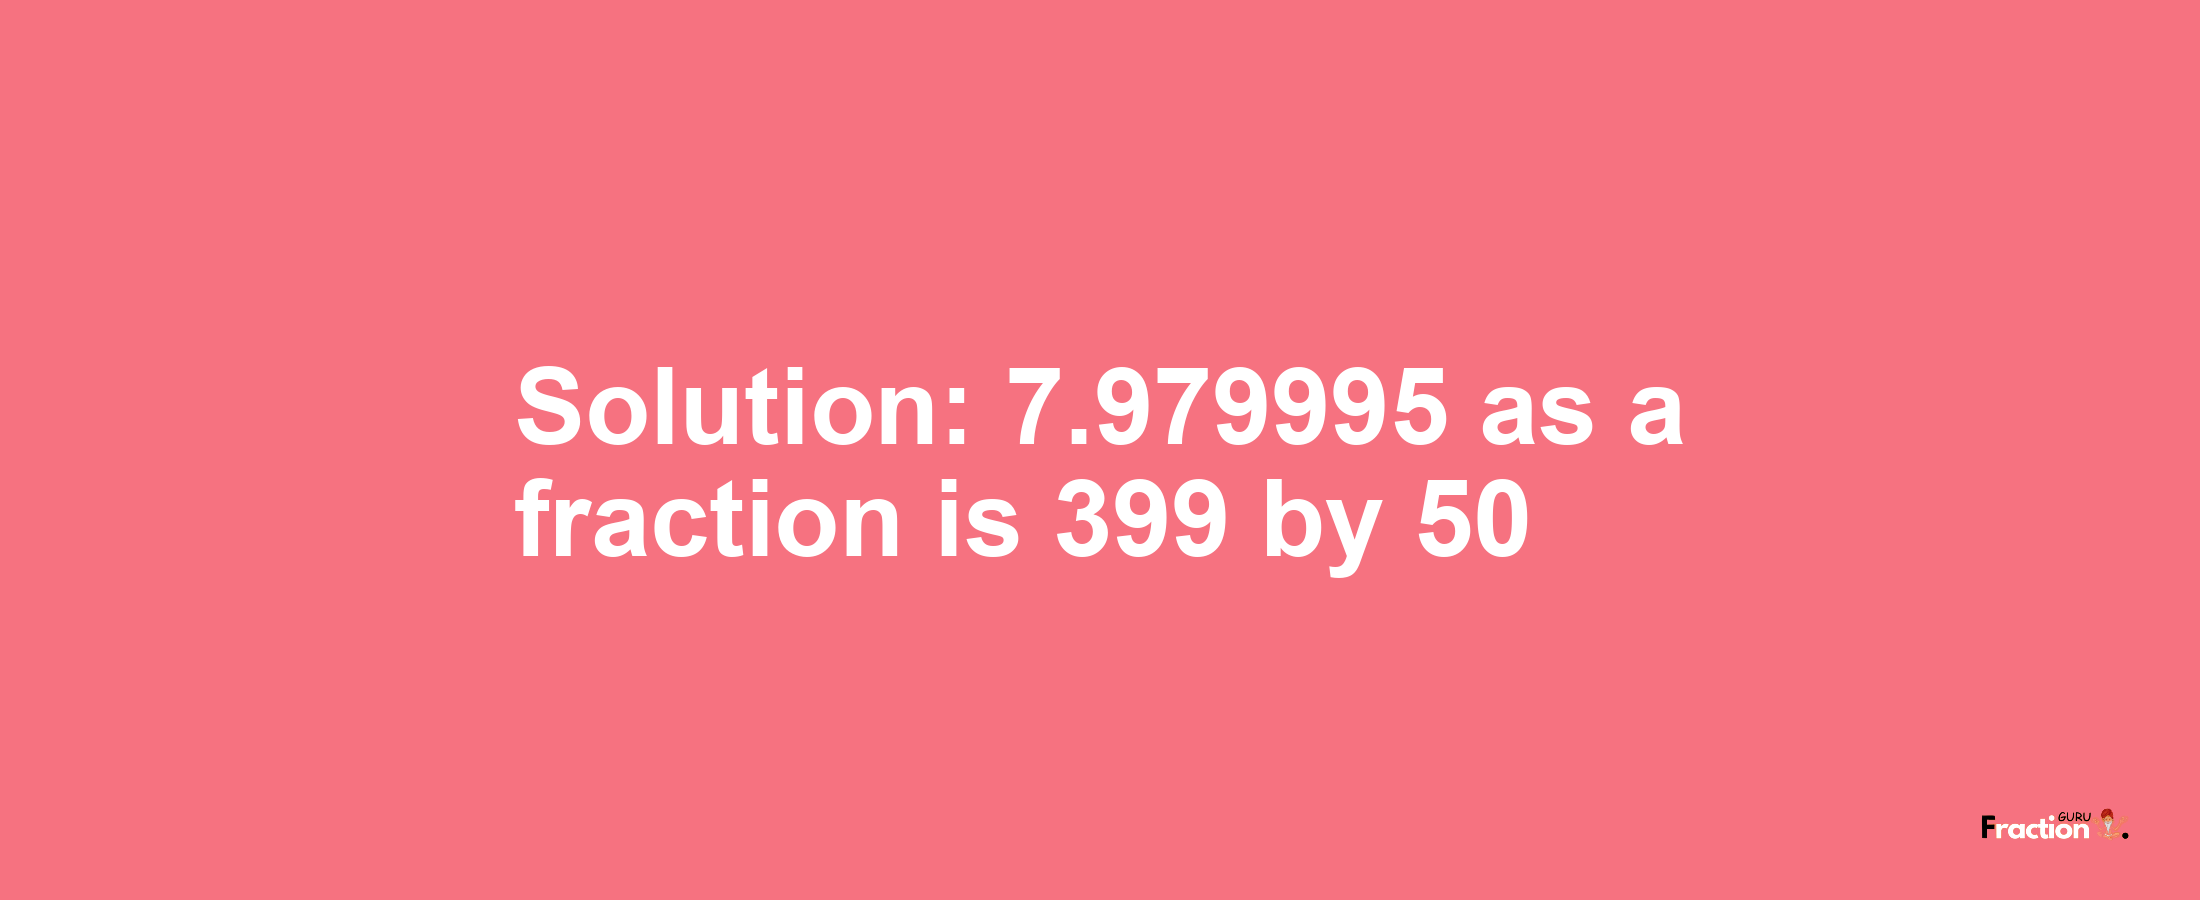 Solution:7.979995 as a fraction is 399/50